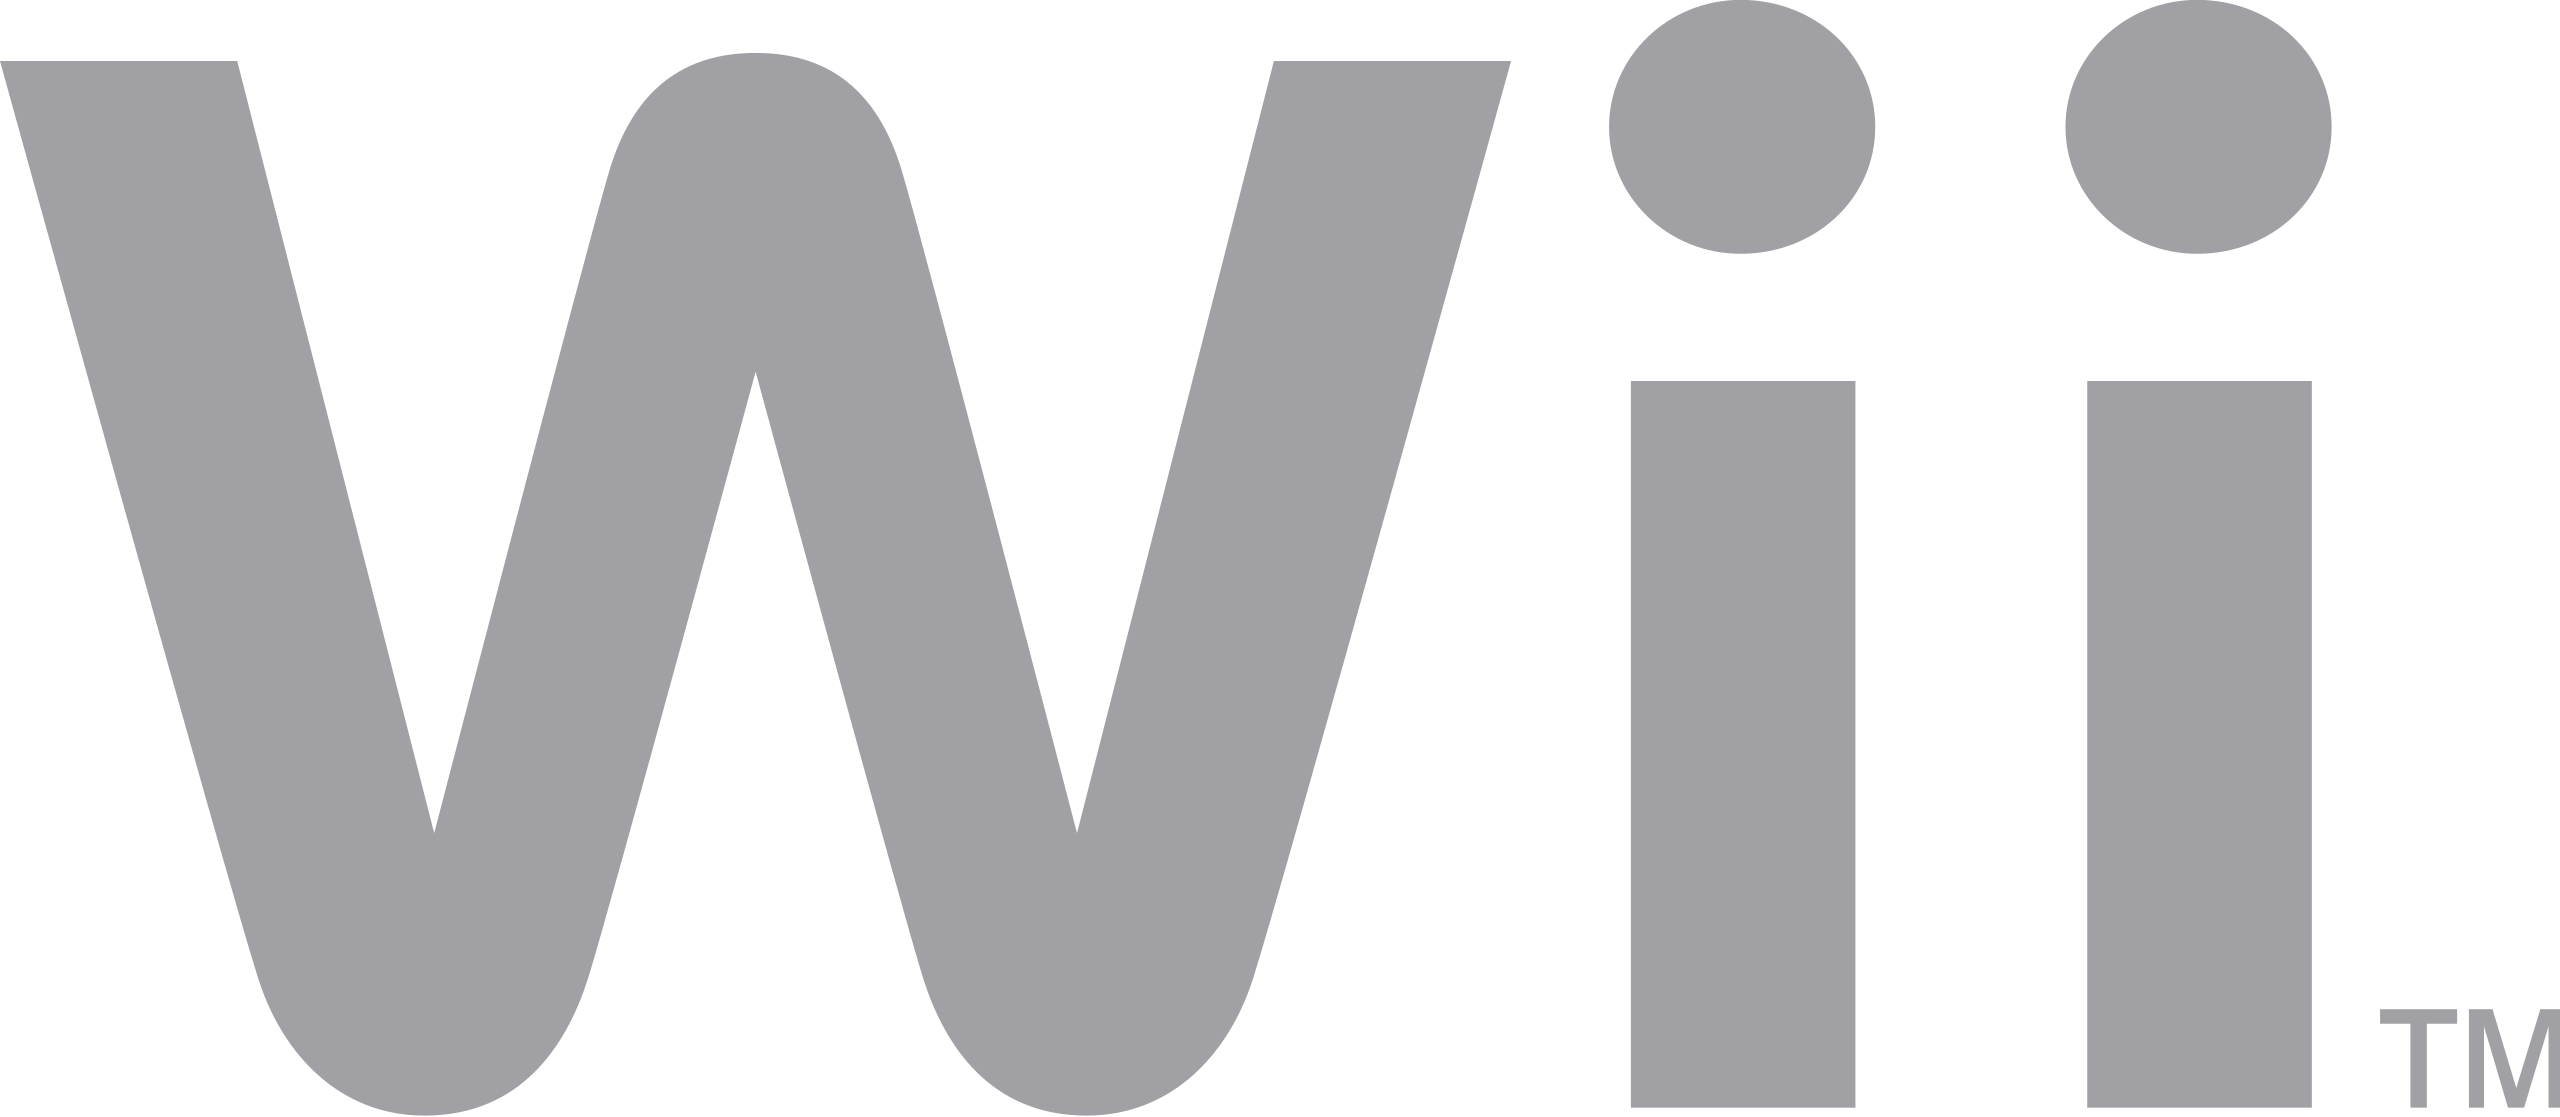 Wii Sports Logo PNG HD Images